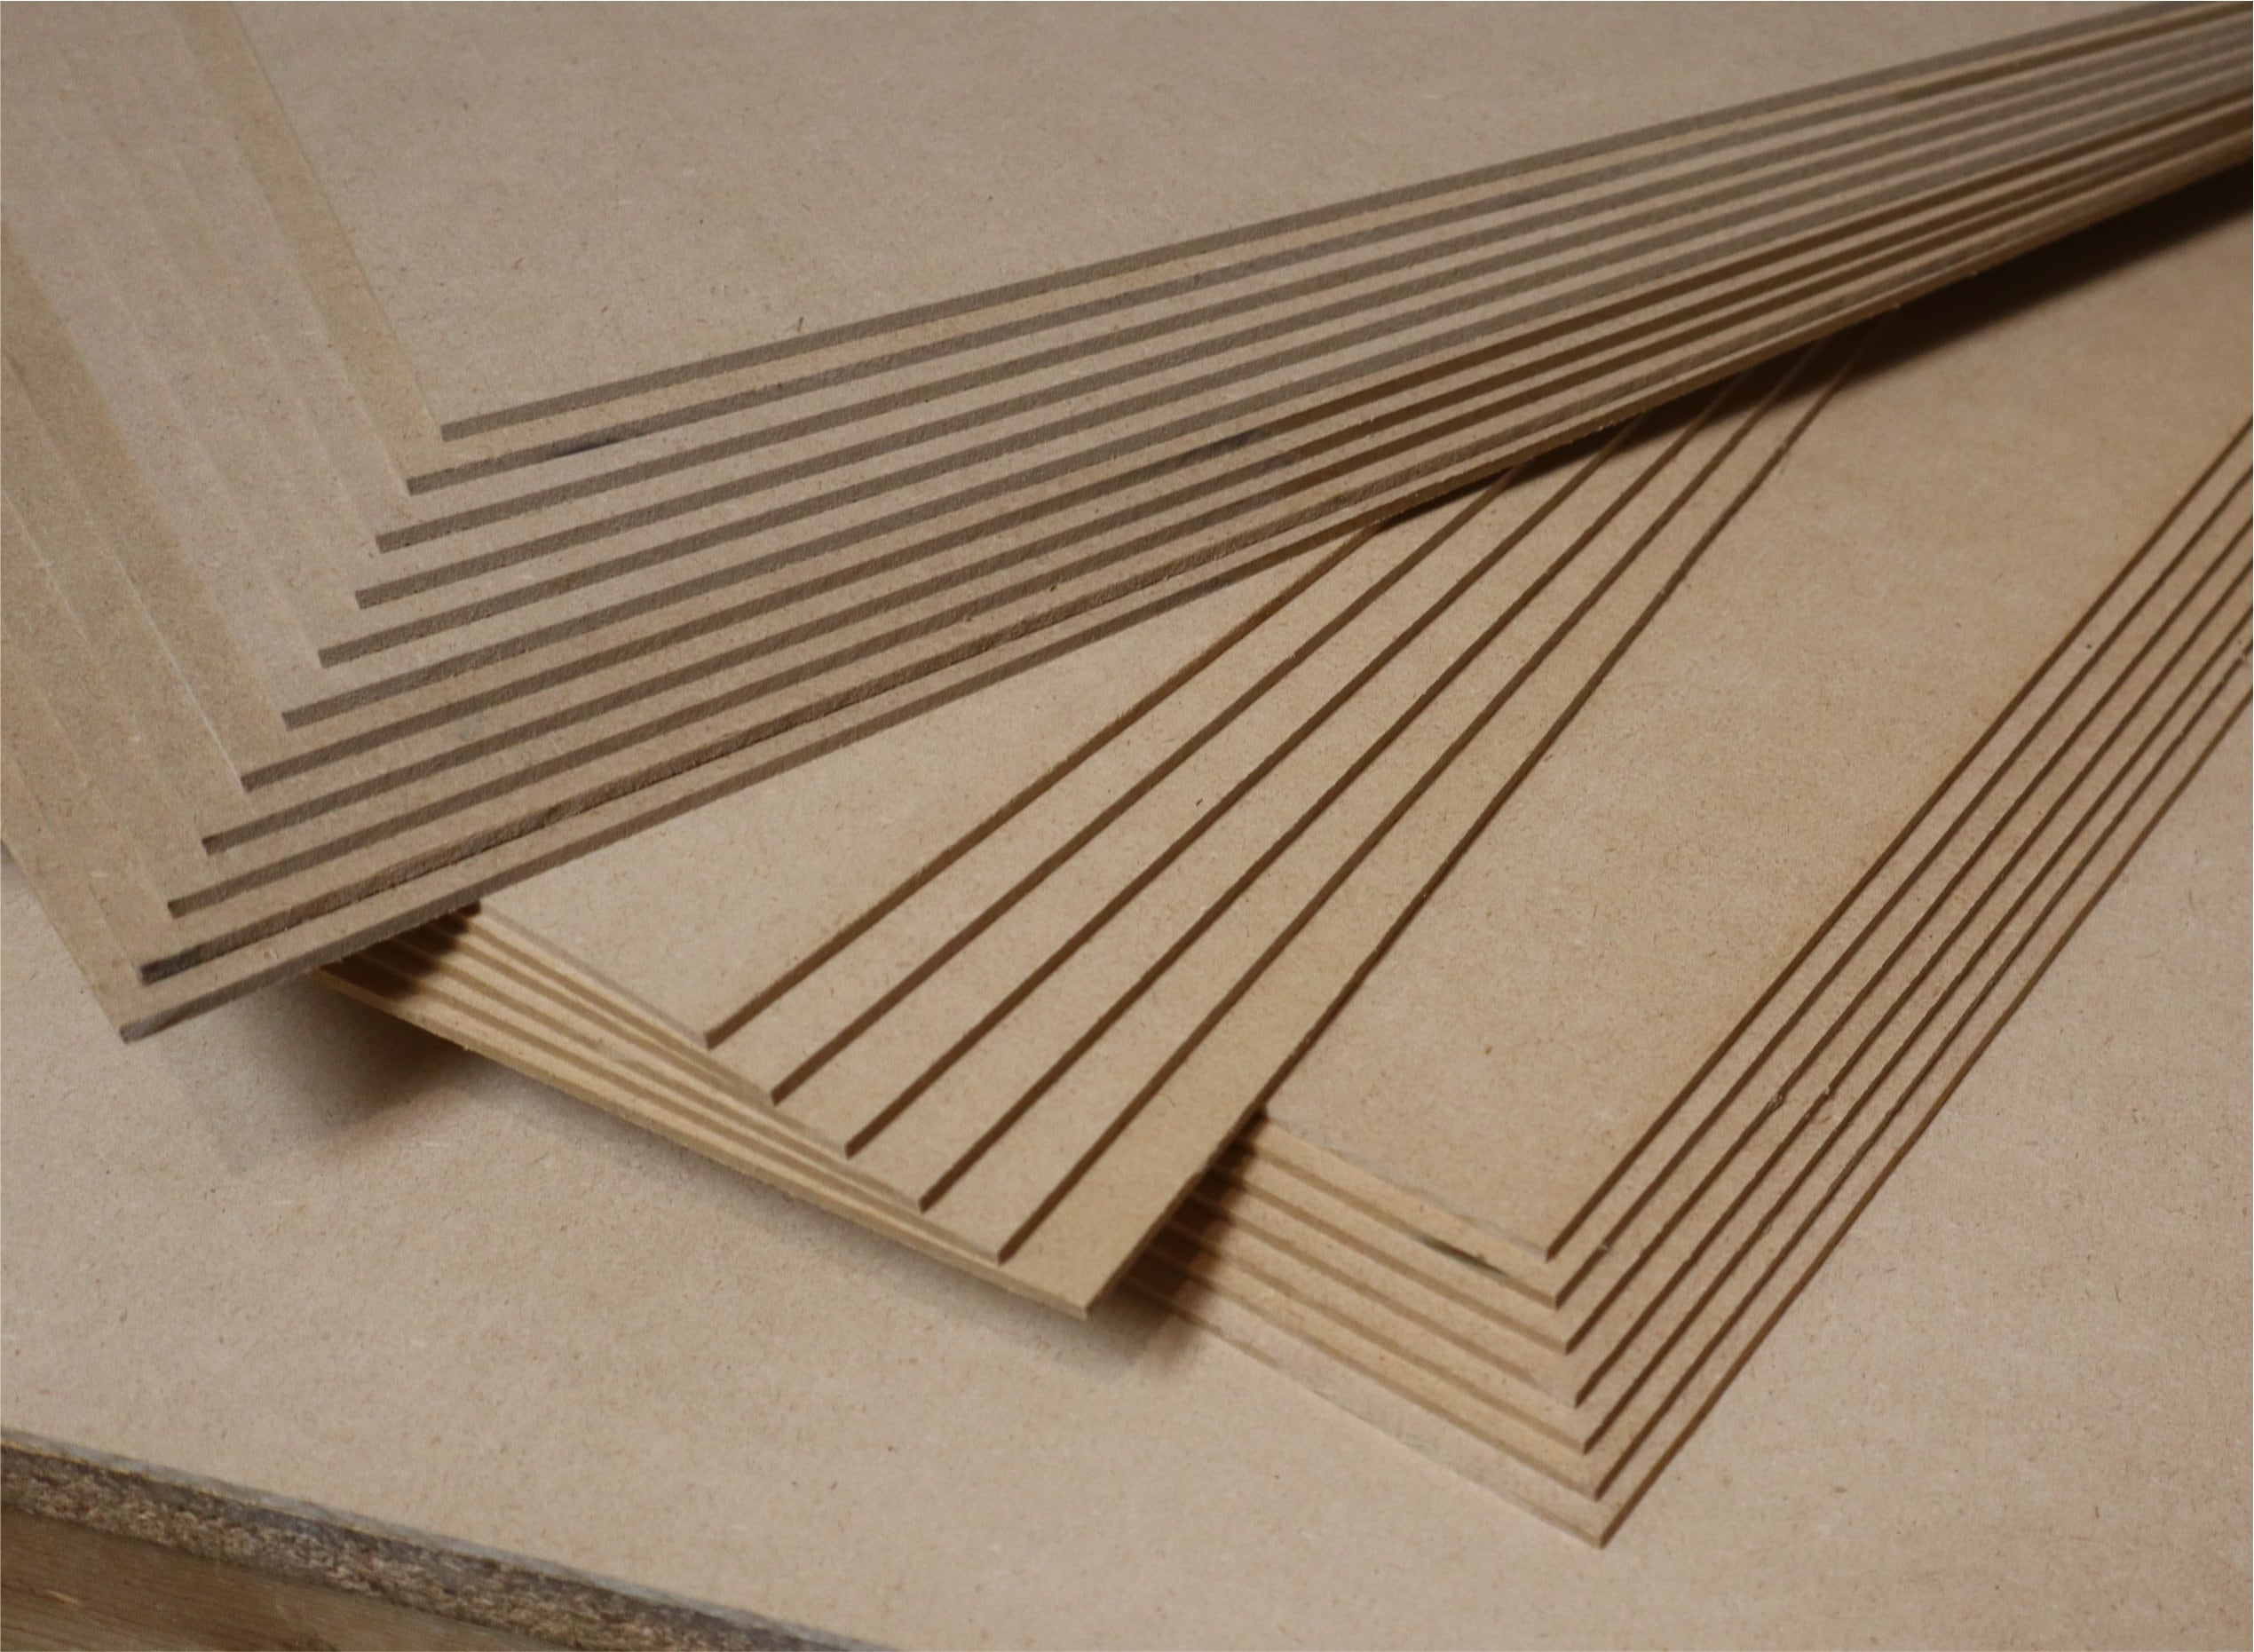 1/8 Baltic Birch Plywood 20 12 X 20 Glowforge Sheets 3mm Birch Wood Laser  Cutting, Engraving, CNC, Painting, Crafting, Woodwork 